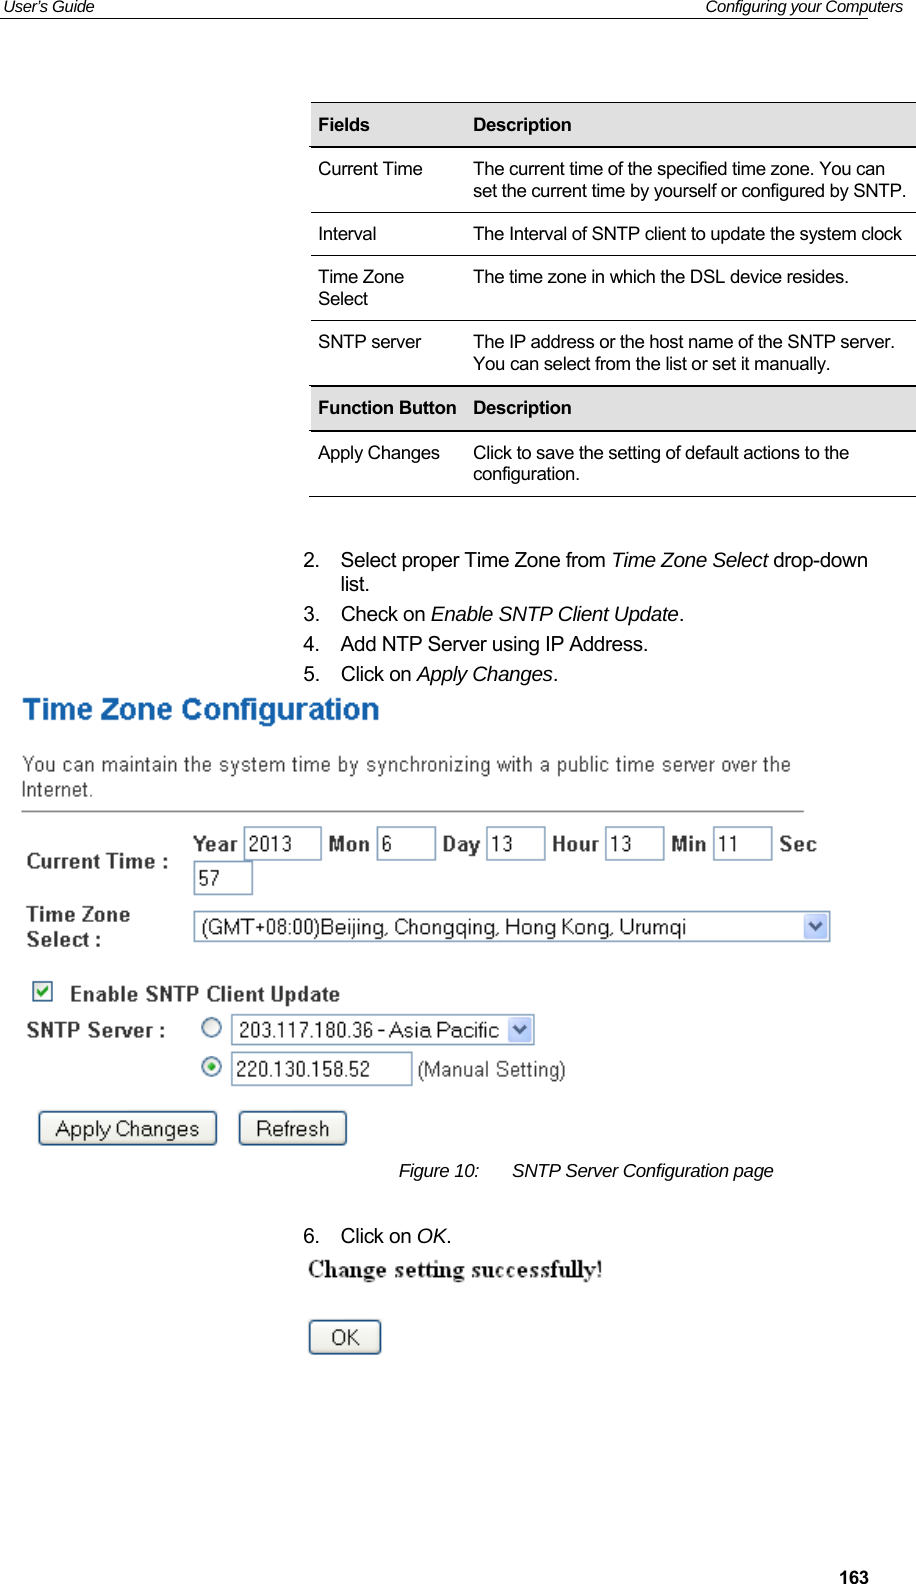 User’s Guide   Configuring your Computers  163                2.  Select proper Time Zone from Time Zone Select drop-down list. 3.  Check on Enable SNTP Client Update.  4.  Add NTP Server using IP Address. 5.  Click on Apply Changes.  Figure 10:  SNTP Server Configuration page  6.  Click on OK.  Fields  Description Current Time  The current time of the specified time zone. You can set the current time by yourself or configured by SNTP.Interval  The Interval of SNTP client to update the system clockTime Zone Select The time zone in which the DSL device resides. SNTP server  The IP address or the host name of the SNTP server. You can select from the list or set it manually. Function Button Description Apply Changes  Click to save the setting of default actions to the configuration. 